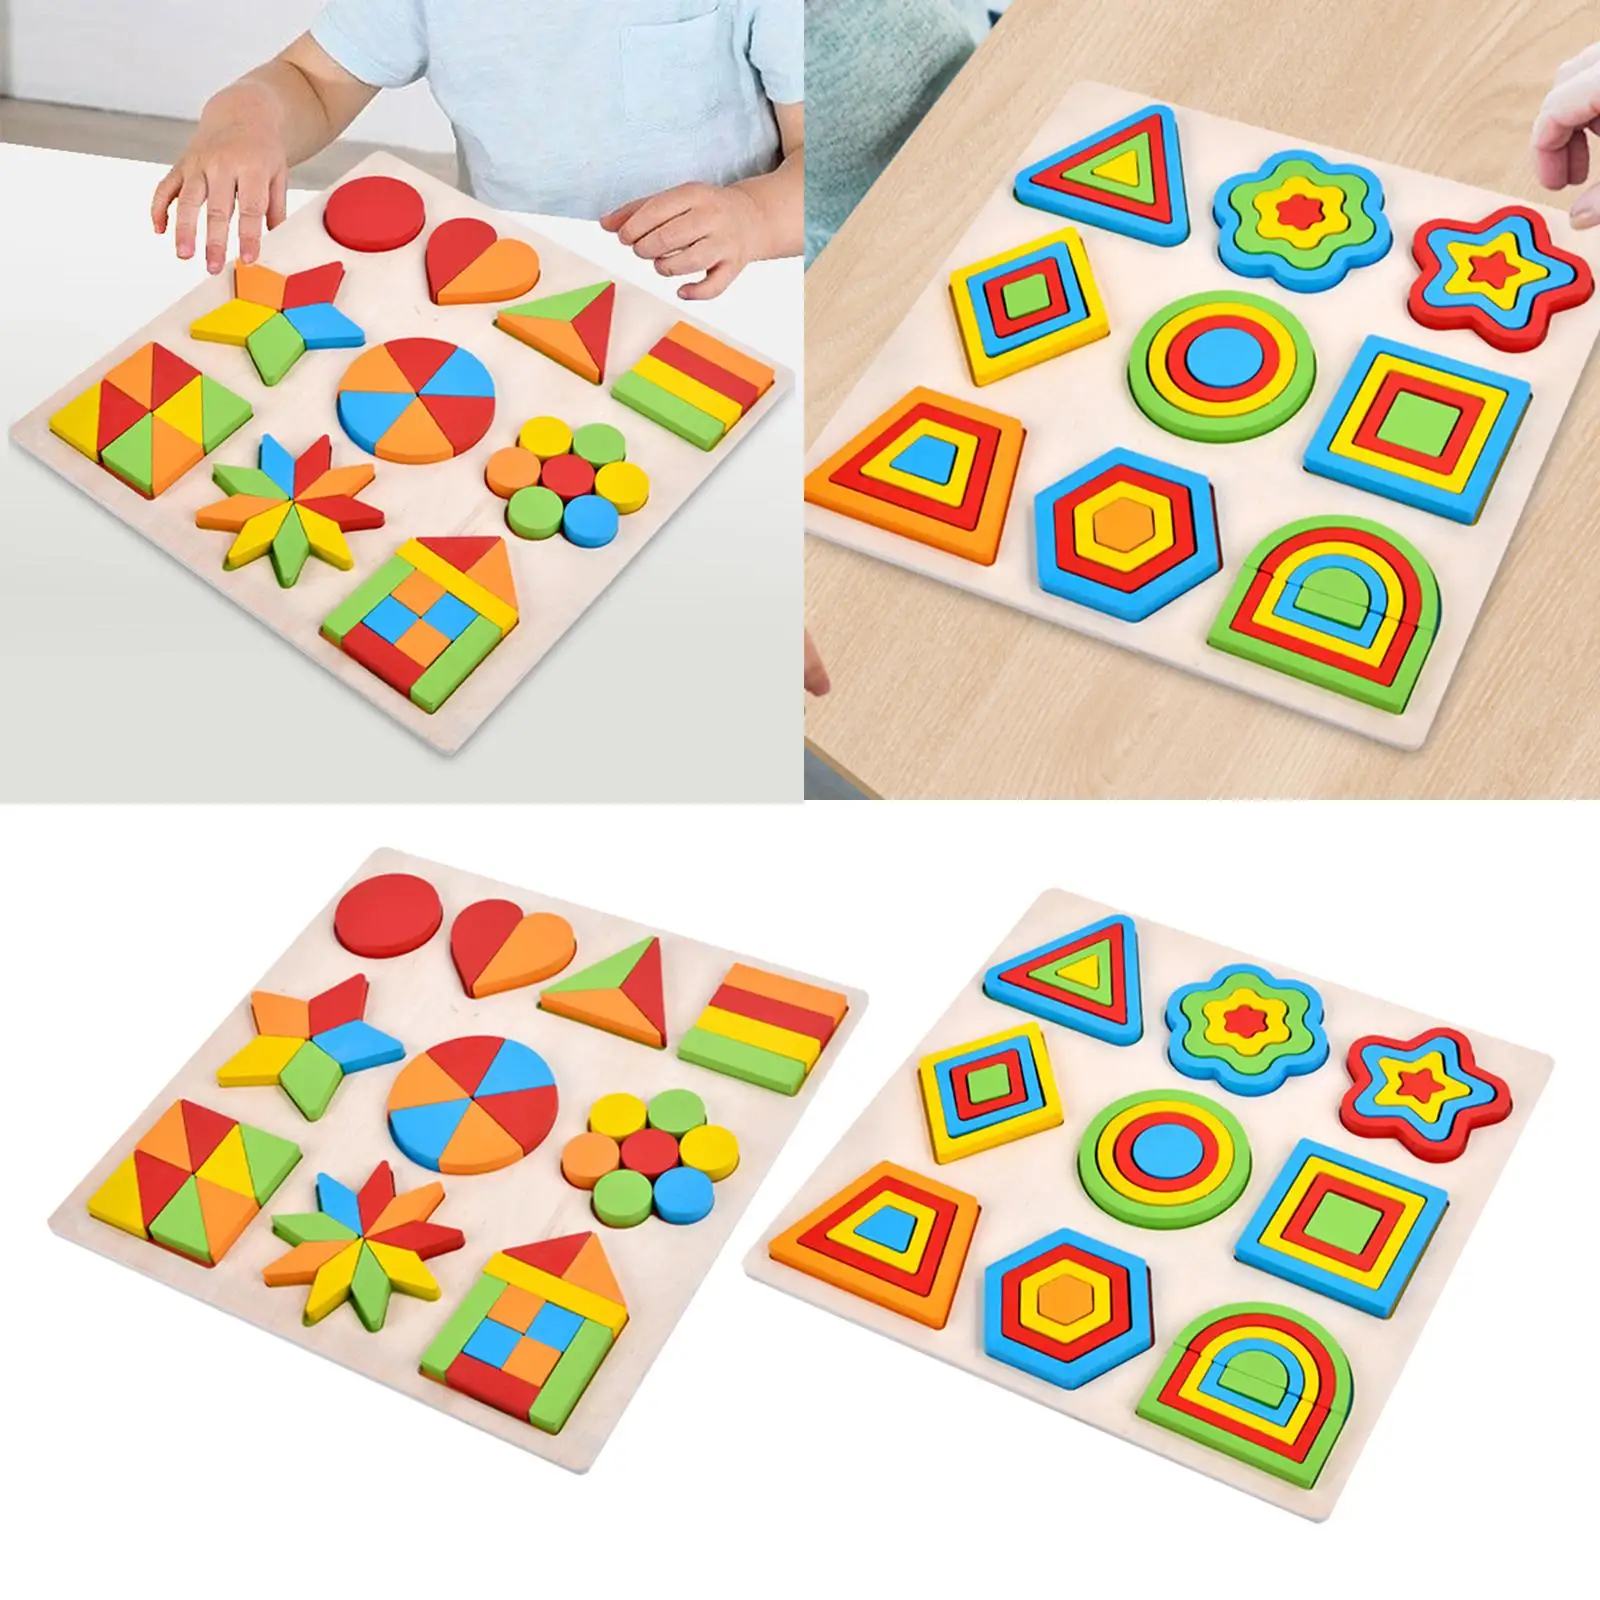 Wooden Puzzle Learning Geometry Teaching Aids Fine Motor Skills Manipulative Puzzle for Girls Boys Toddlers Children Kids